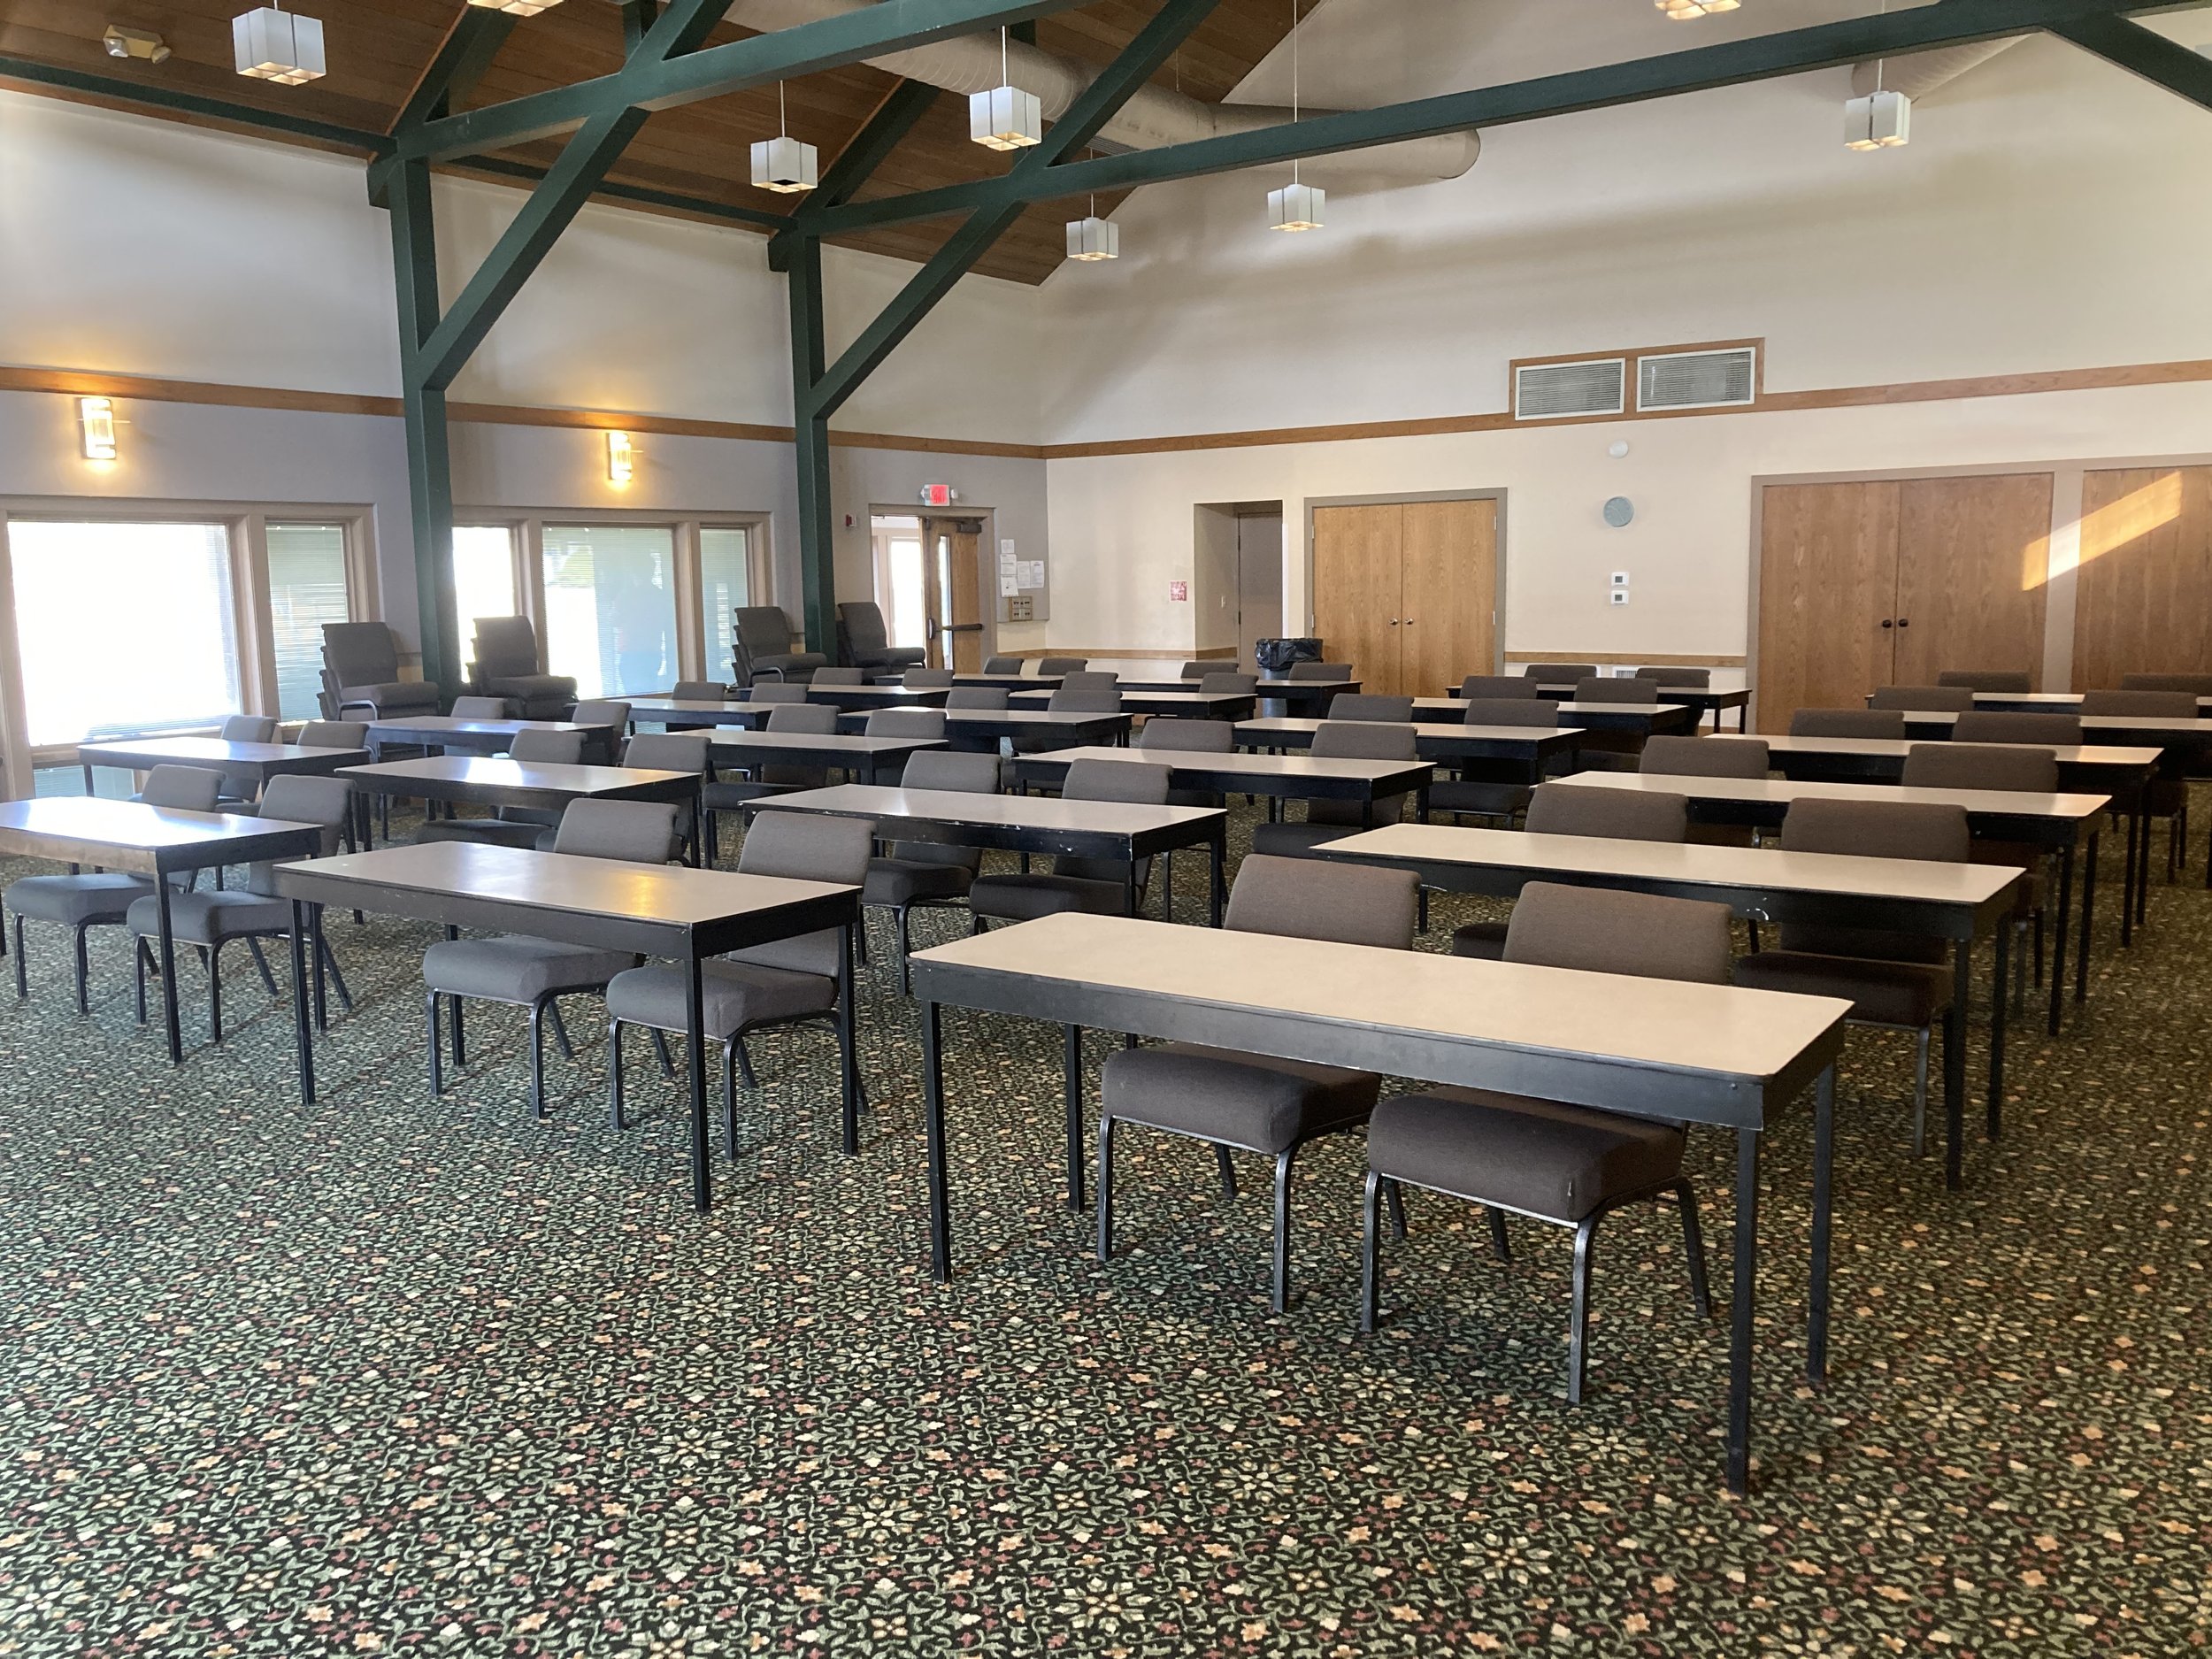 Classroom Style, 40 chairs